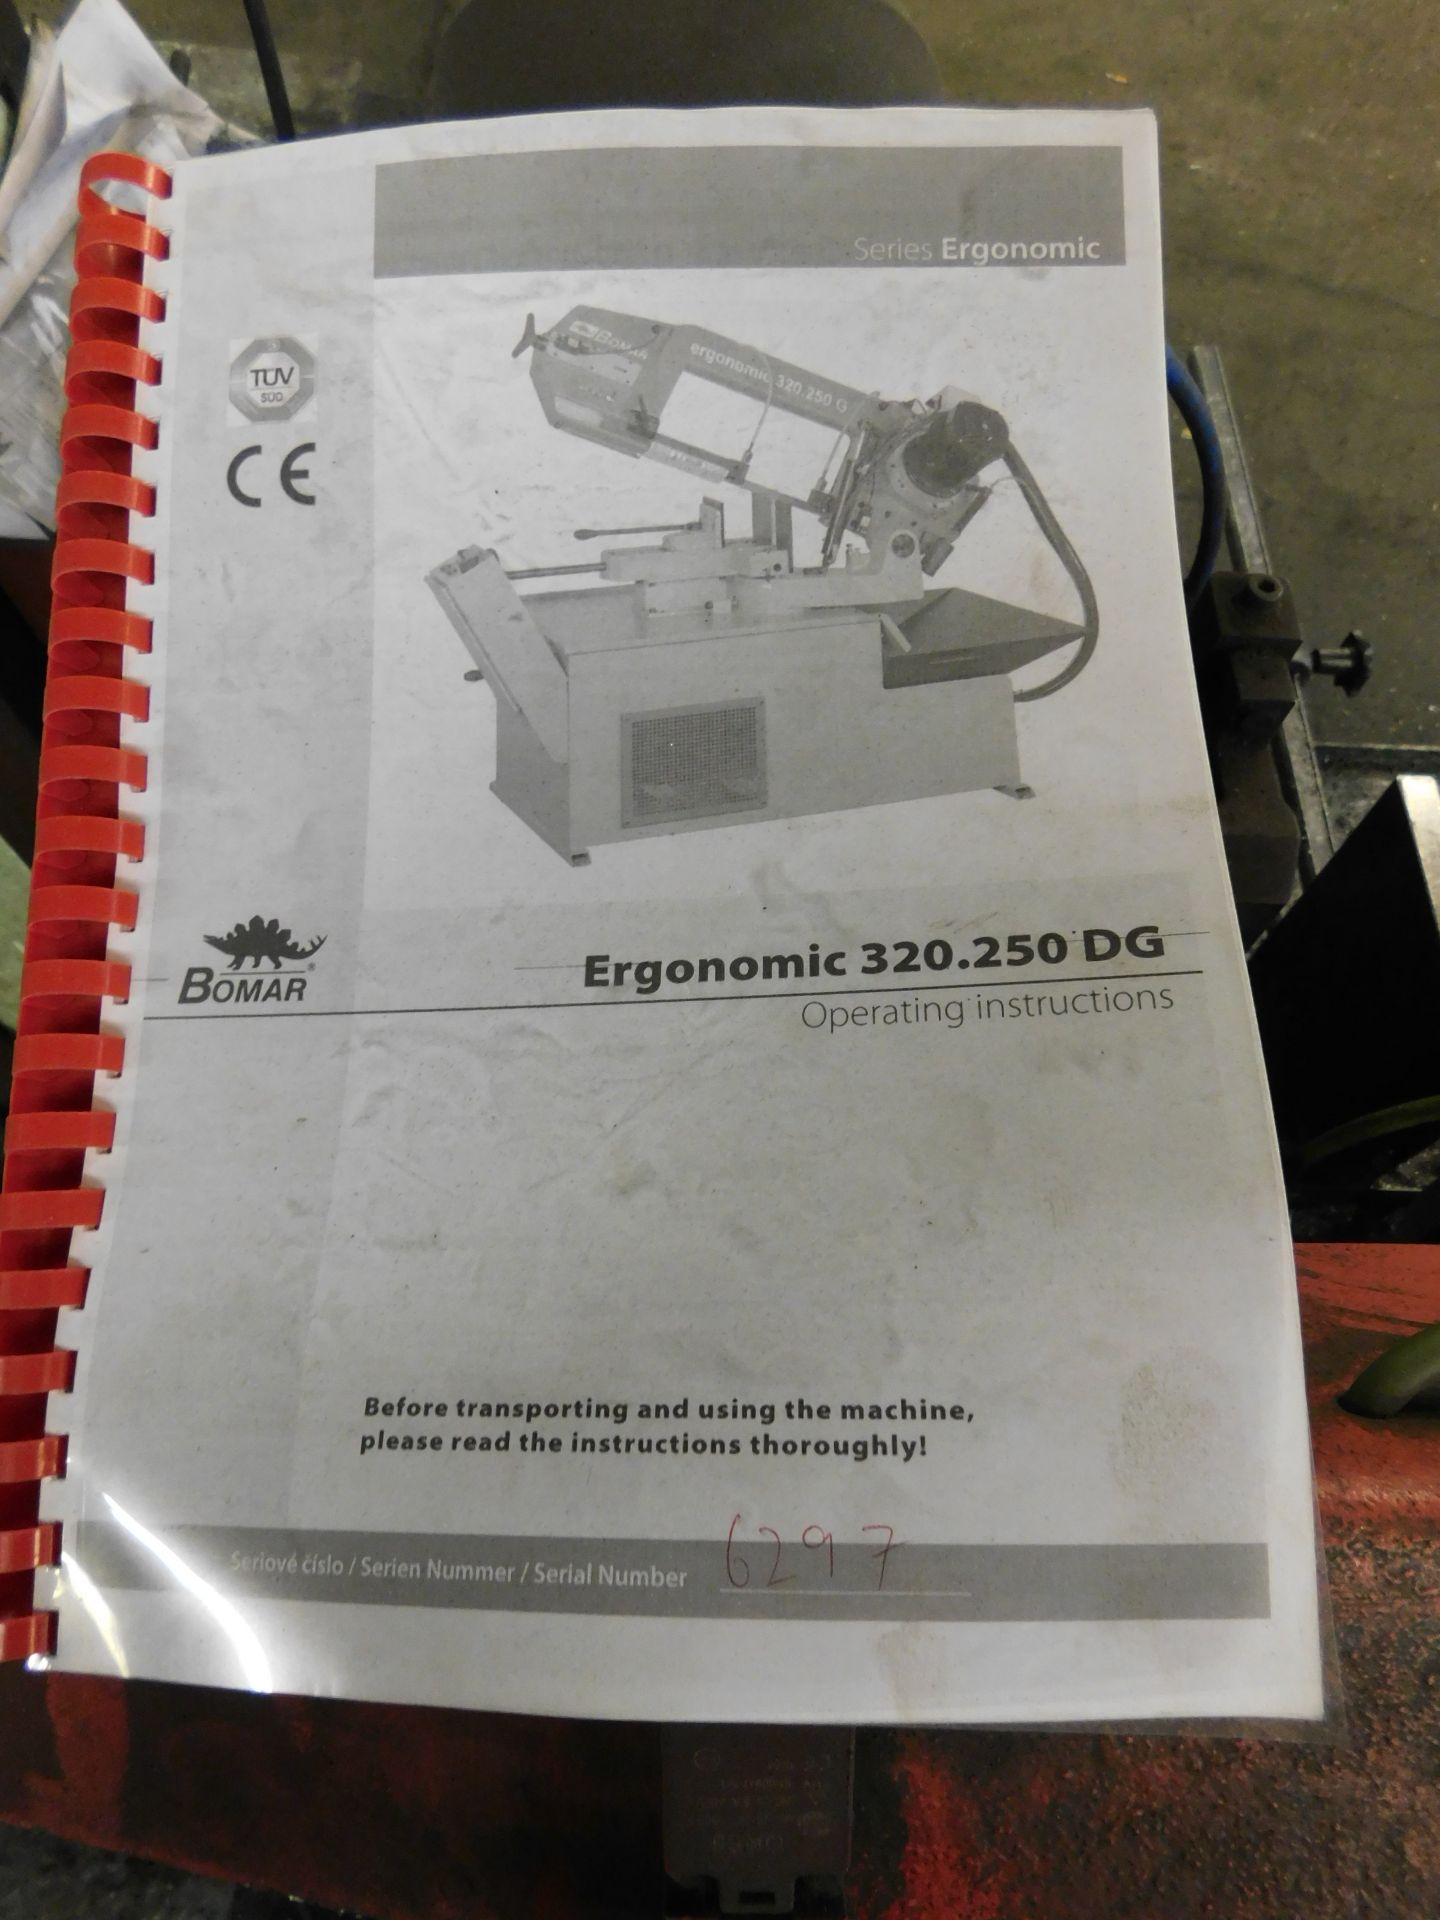 Bomar Ergonomic 320.250 DG Horizontal Bandsaw with 5 Roller feed Stands, Serial Number 6297 ( - Image 2 of 11